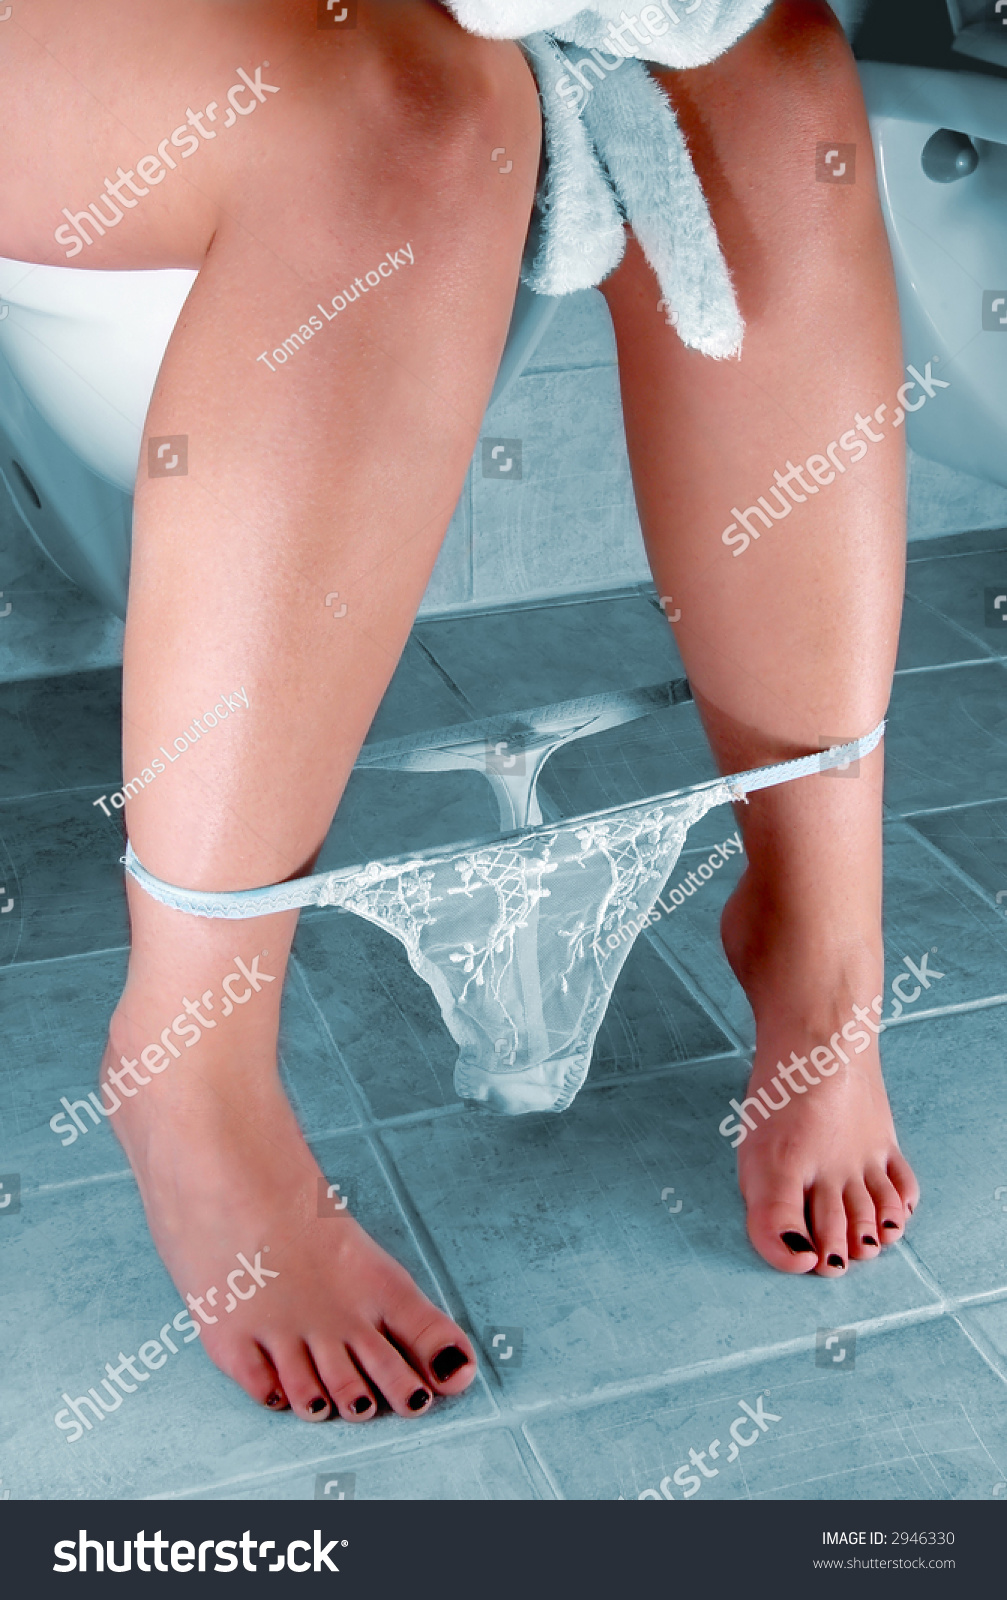 Photo Of Woman Sitting On A Toilet. - 2946330 : Shutterstock